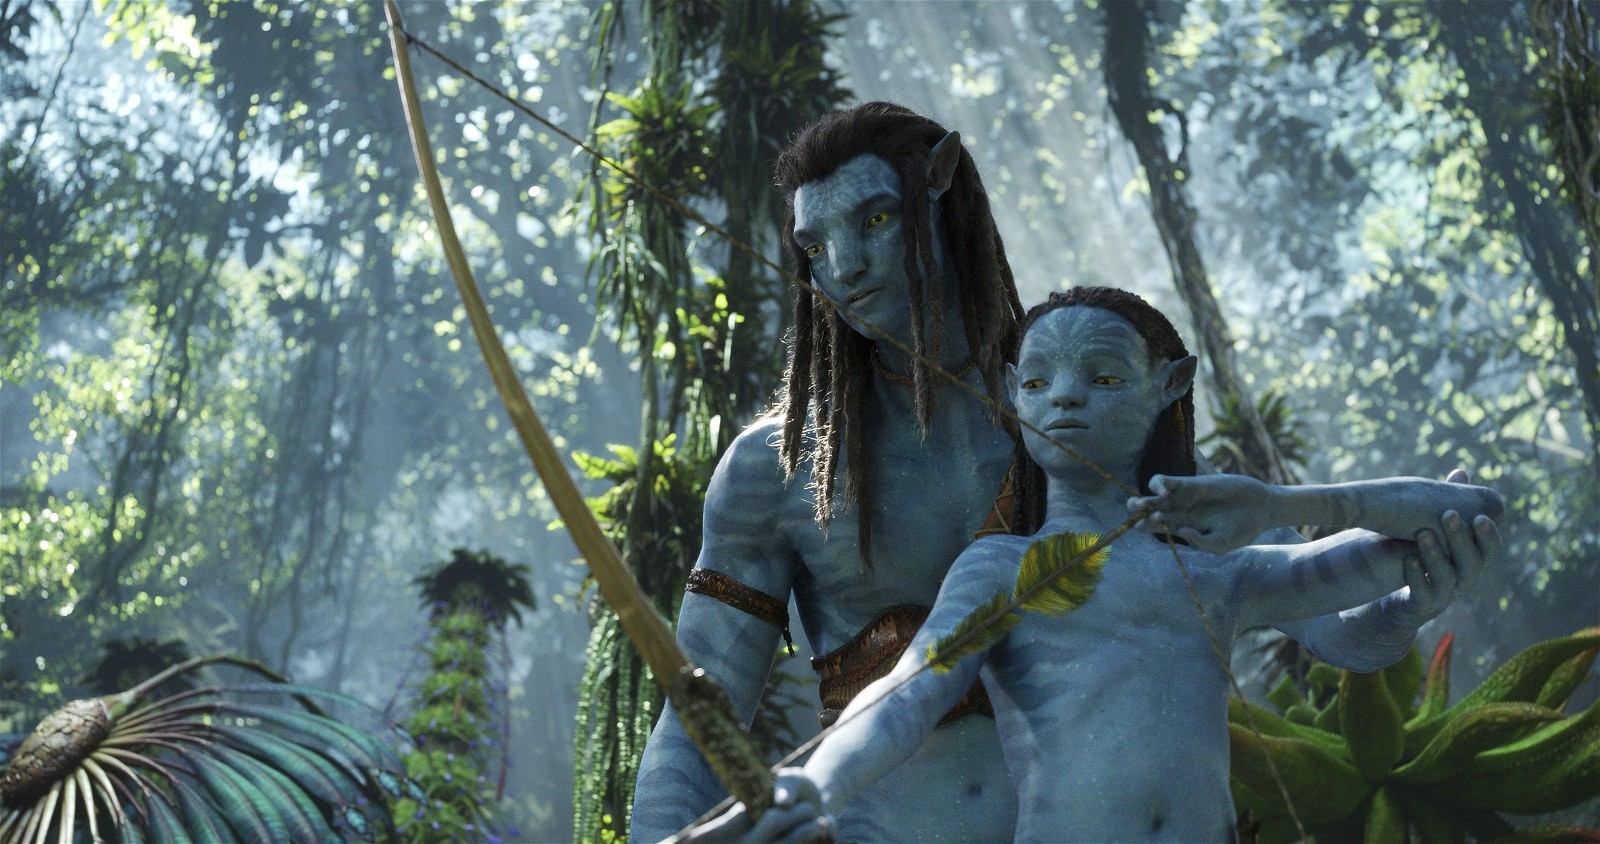 Avatar 2 continues the epic legacy of James Cameron's vision